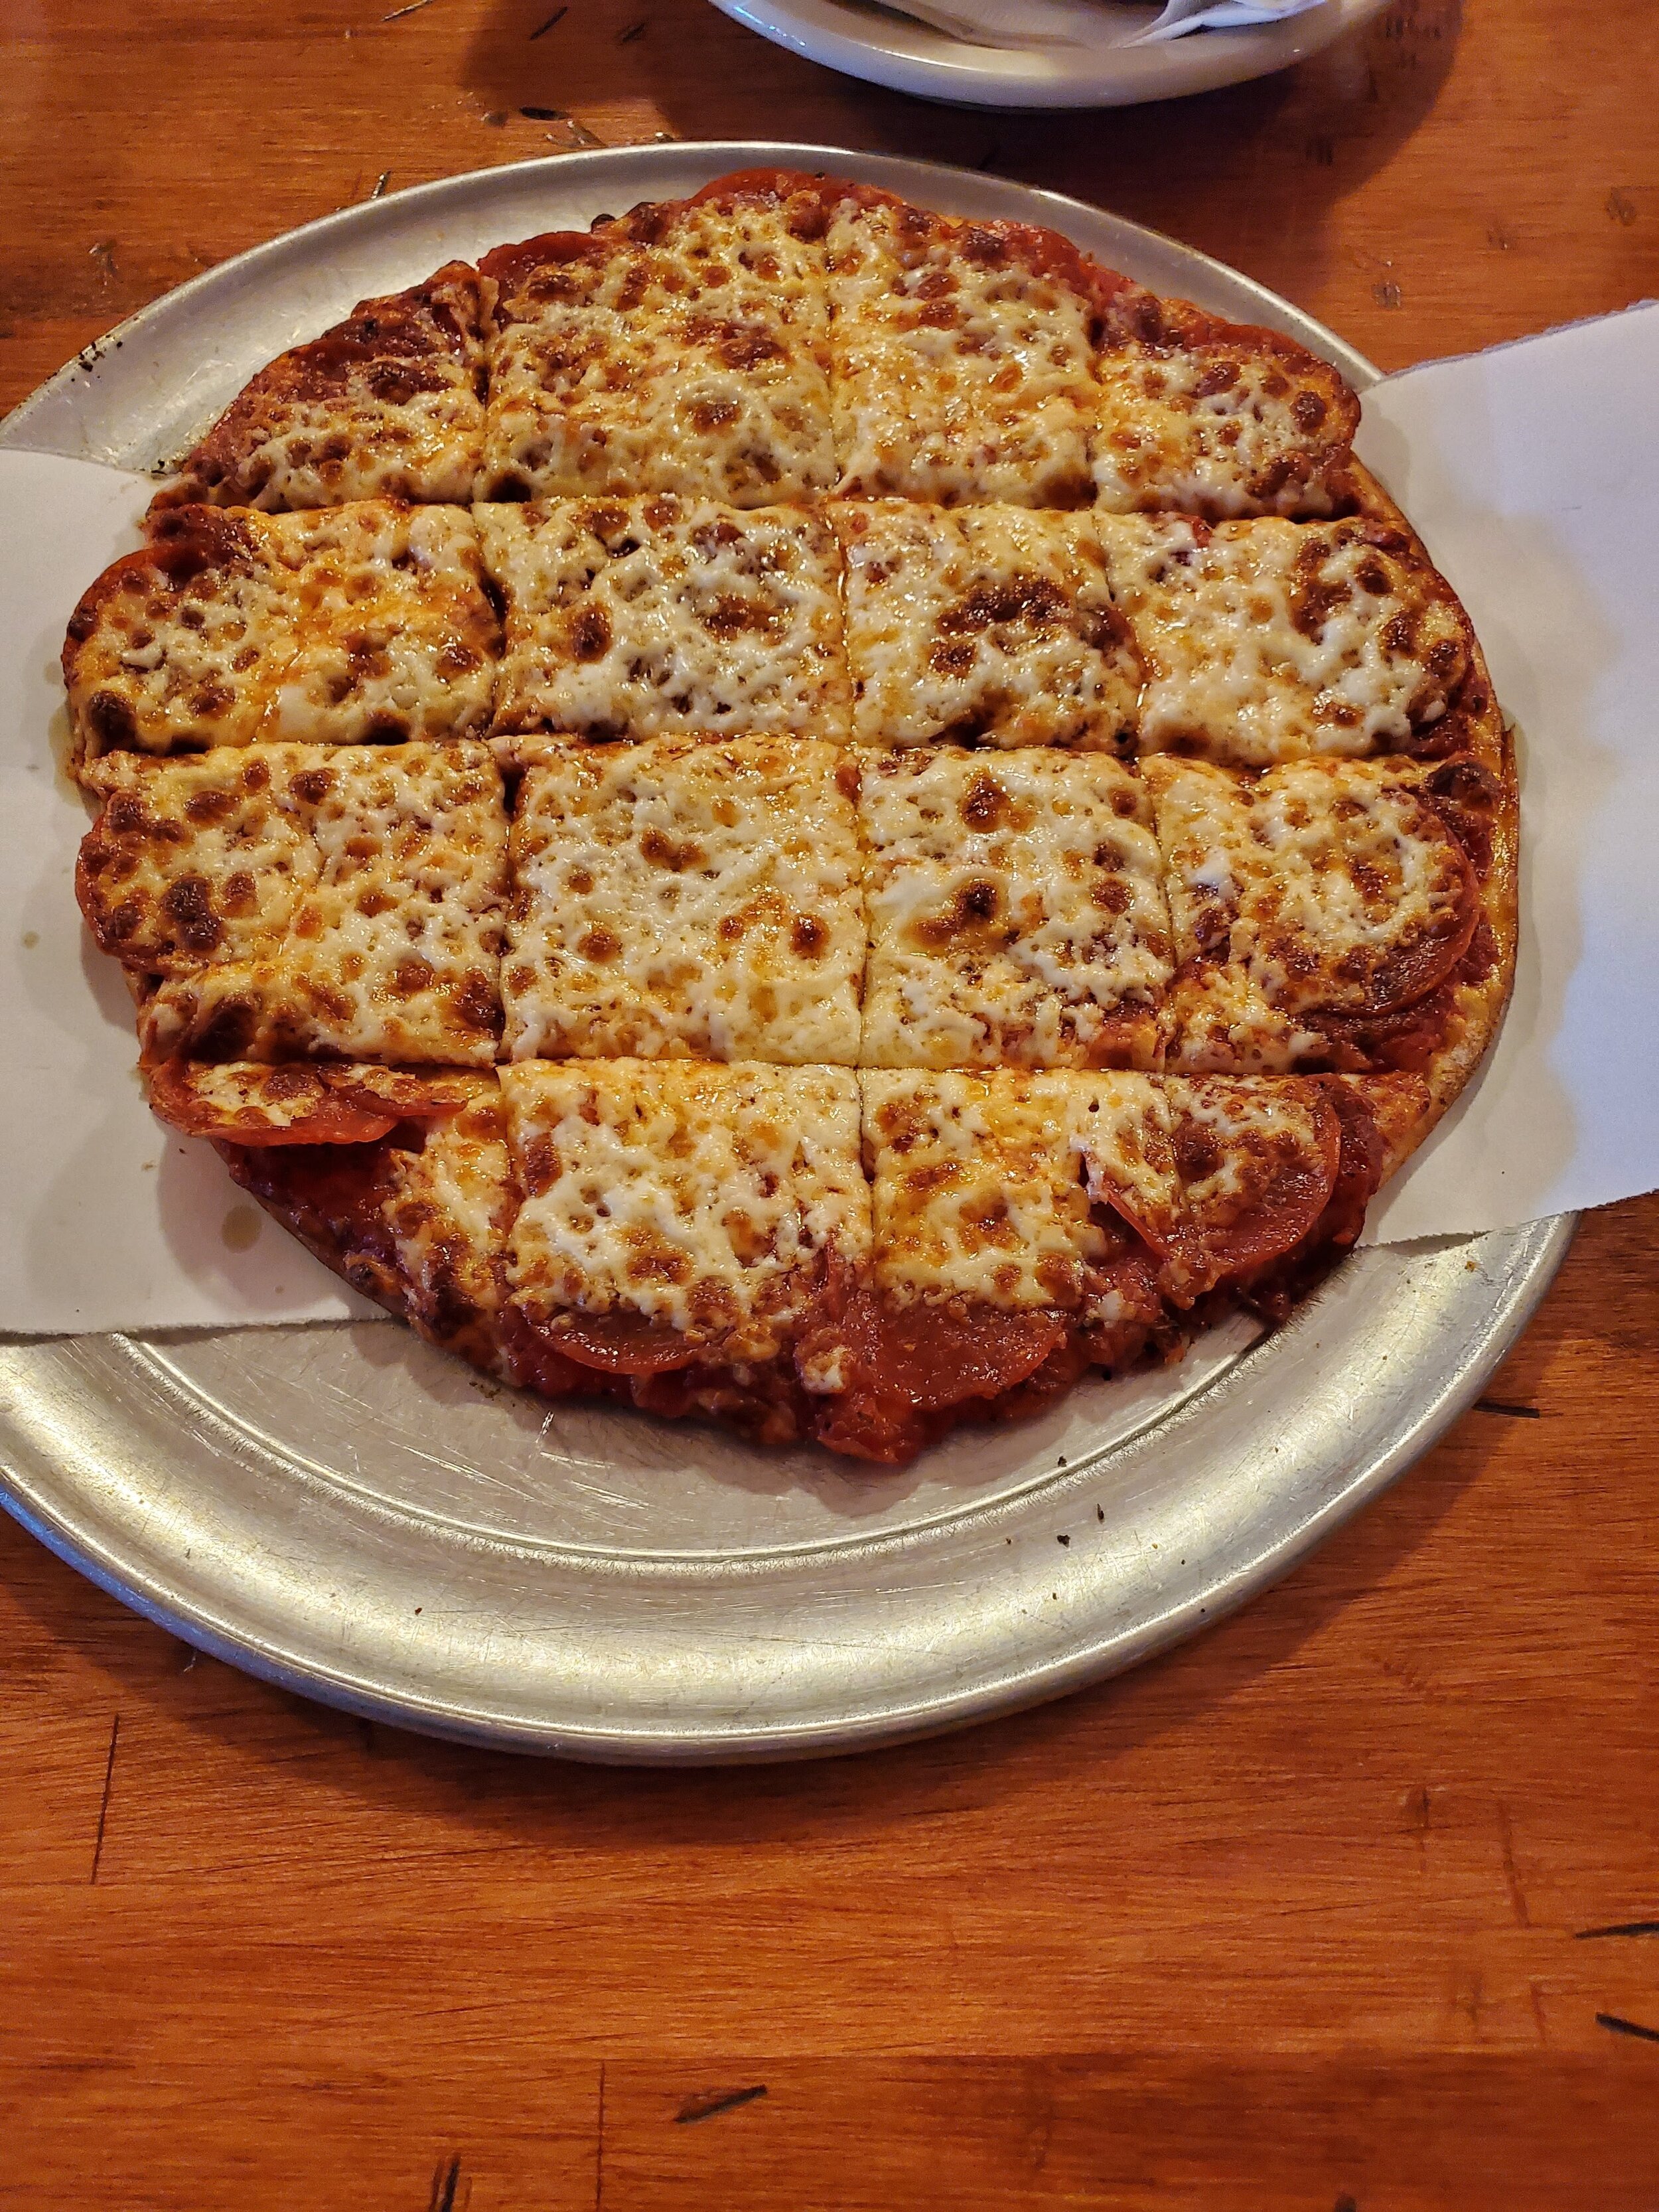 Pepperoni Pizza at "My Sisters Place"